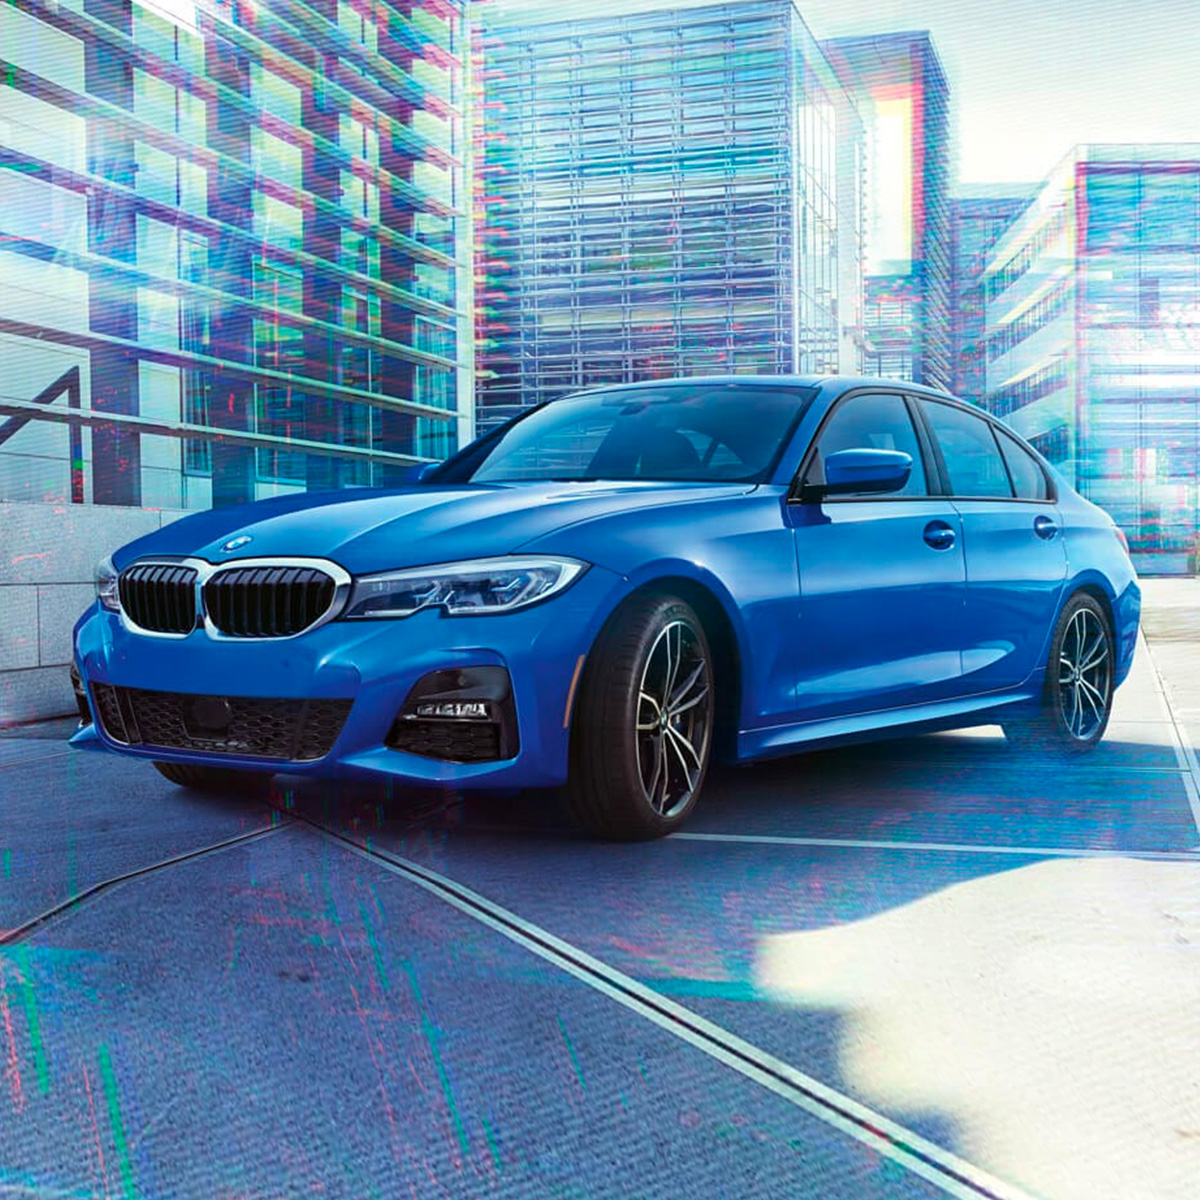 Profile view of blue 2021 BMW 3 Series on city street